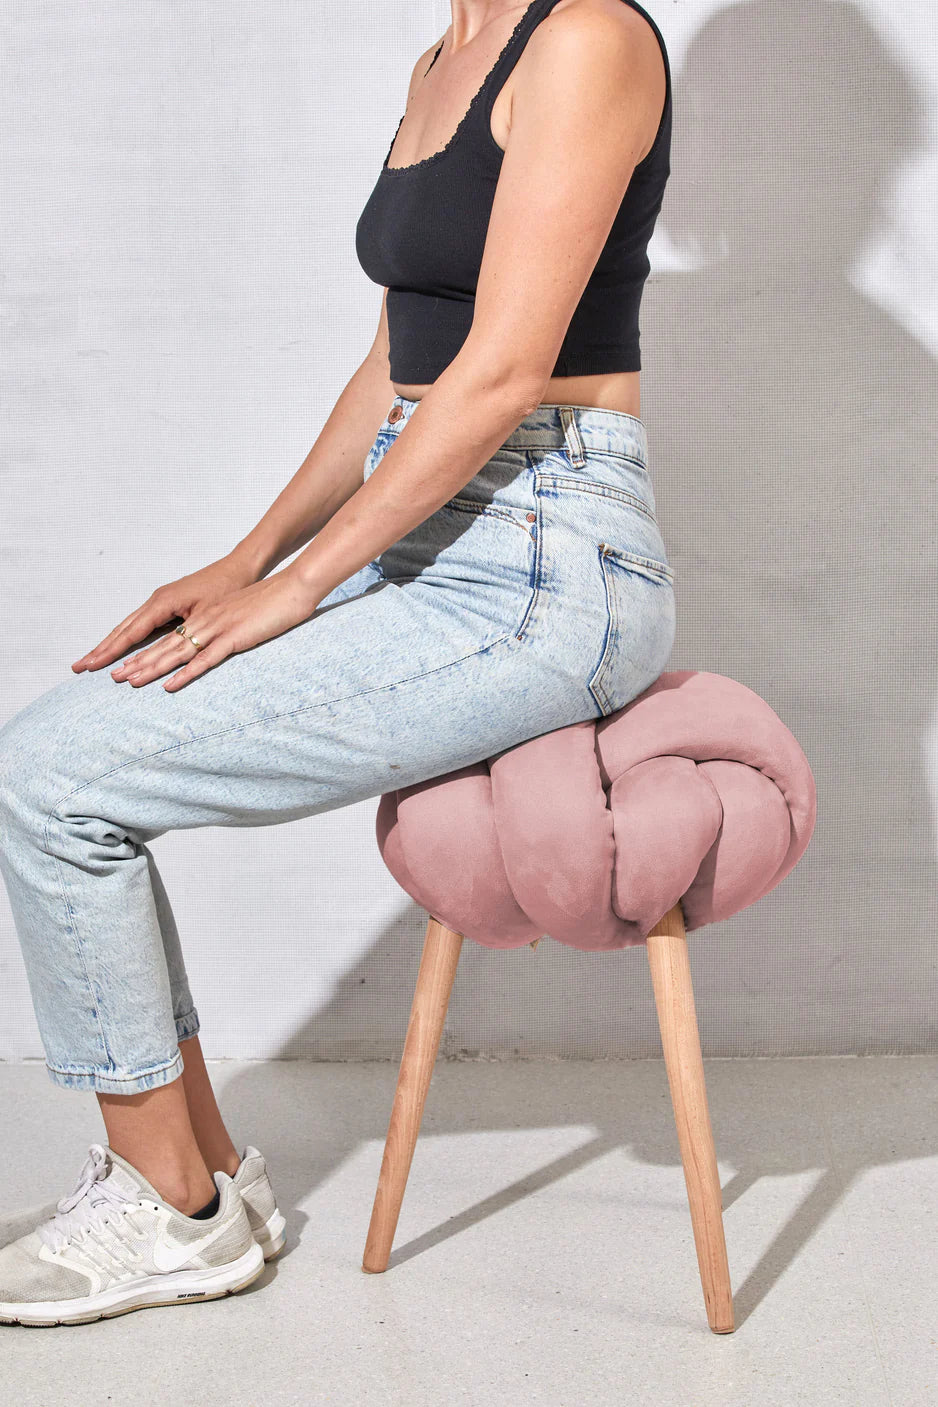 Suede Knot Stool- Rose Pink